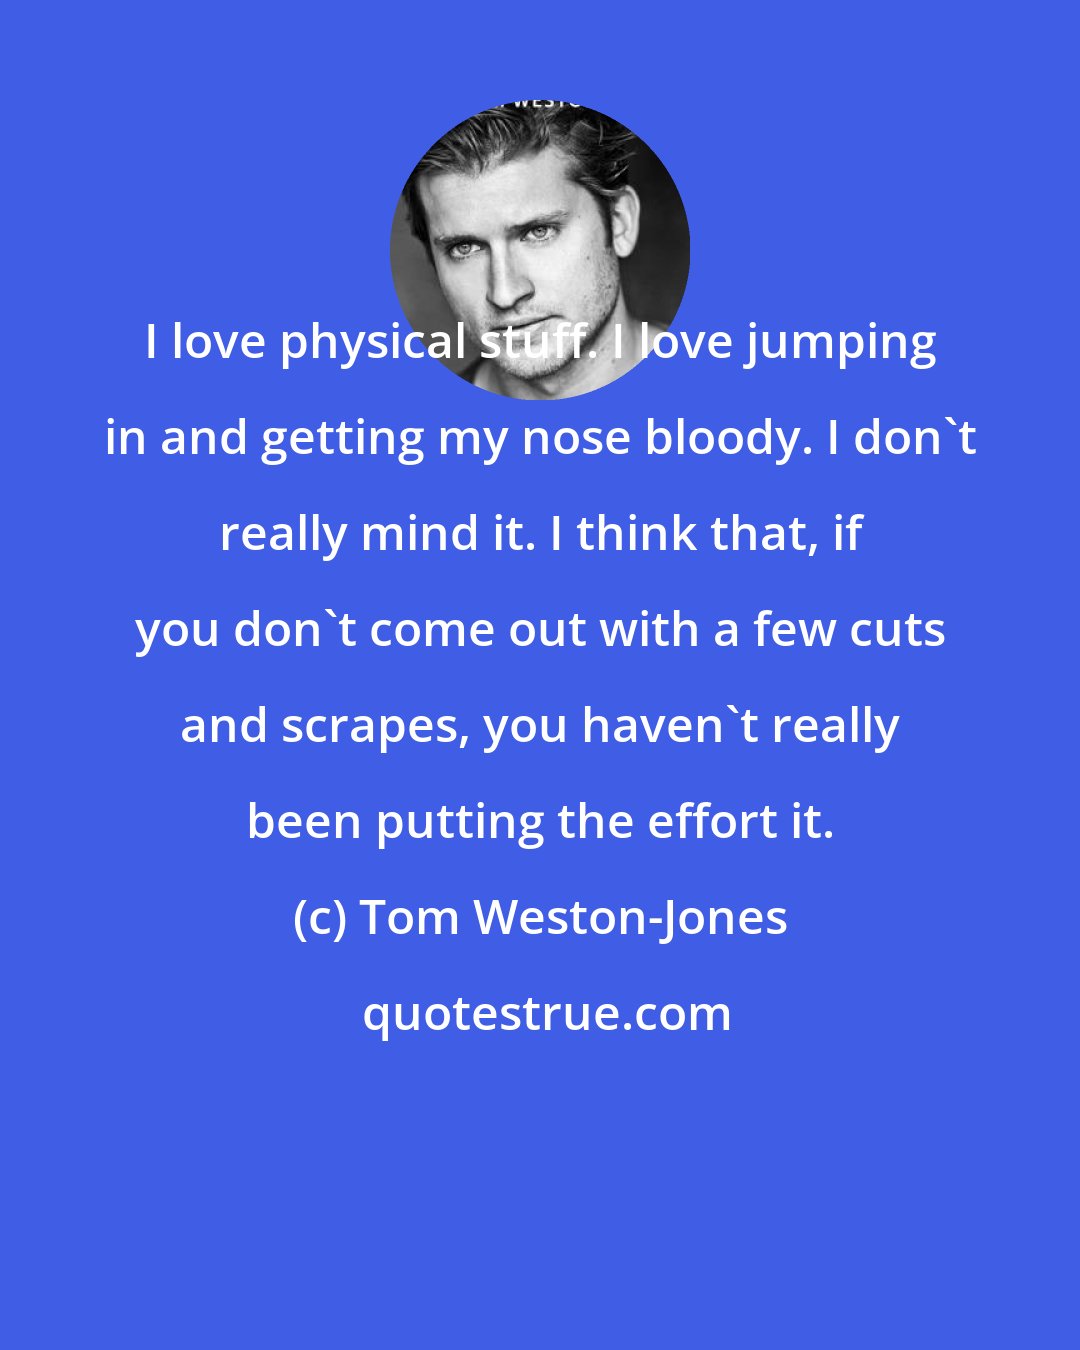 Tom Weston-Jones: I love physical stuff. I love jumping in and getting my nose bloody. I don't really mind it. I think that, if you don't come out with a few cuts and scrapes, you haven't really been putting the effort it.